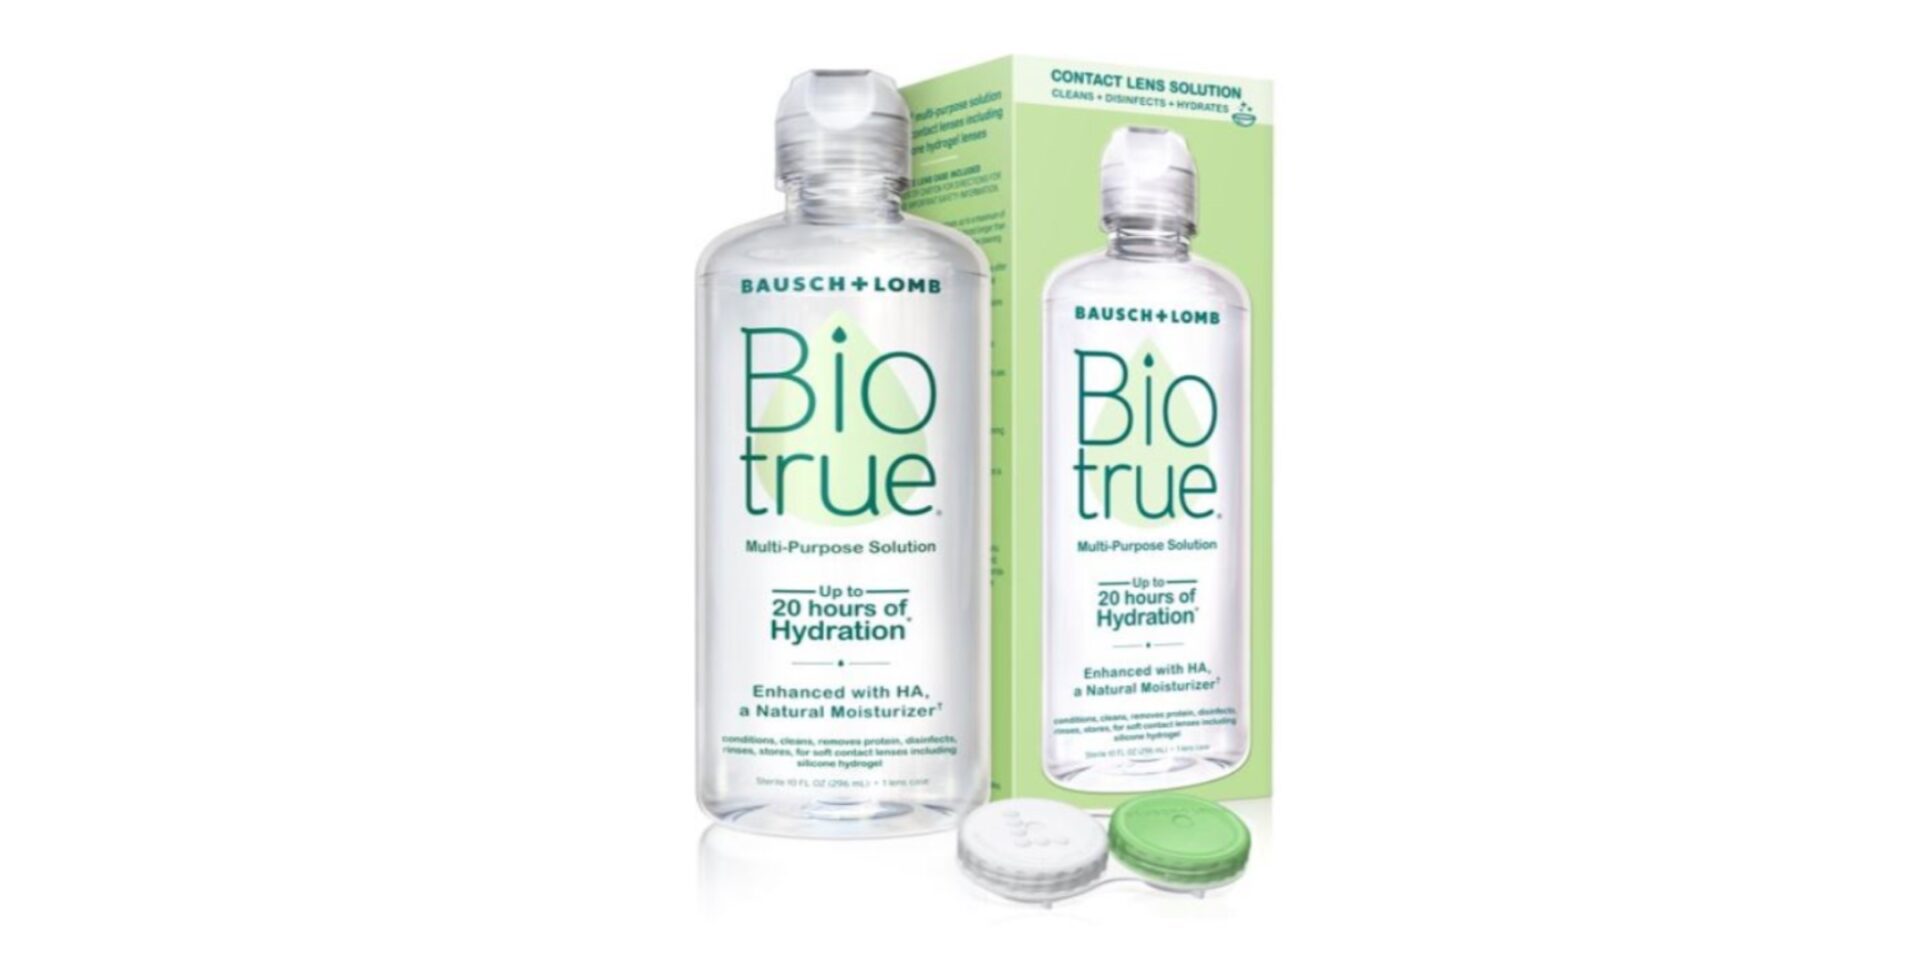 Bausch and Lomb Bio True contact lens cleaner